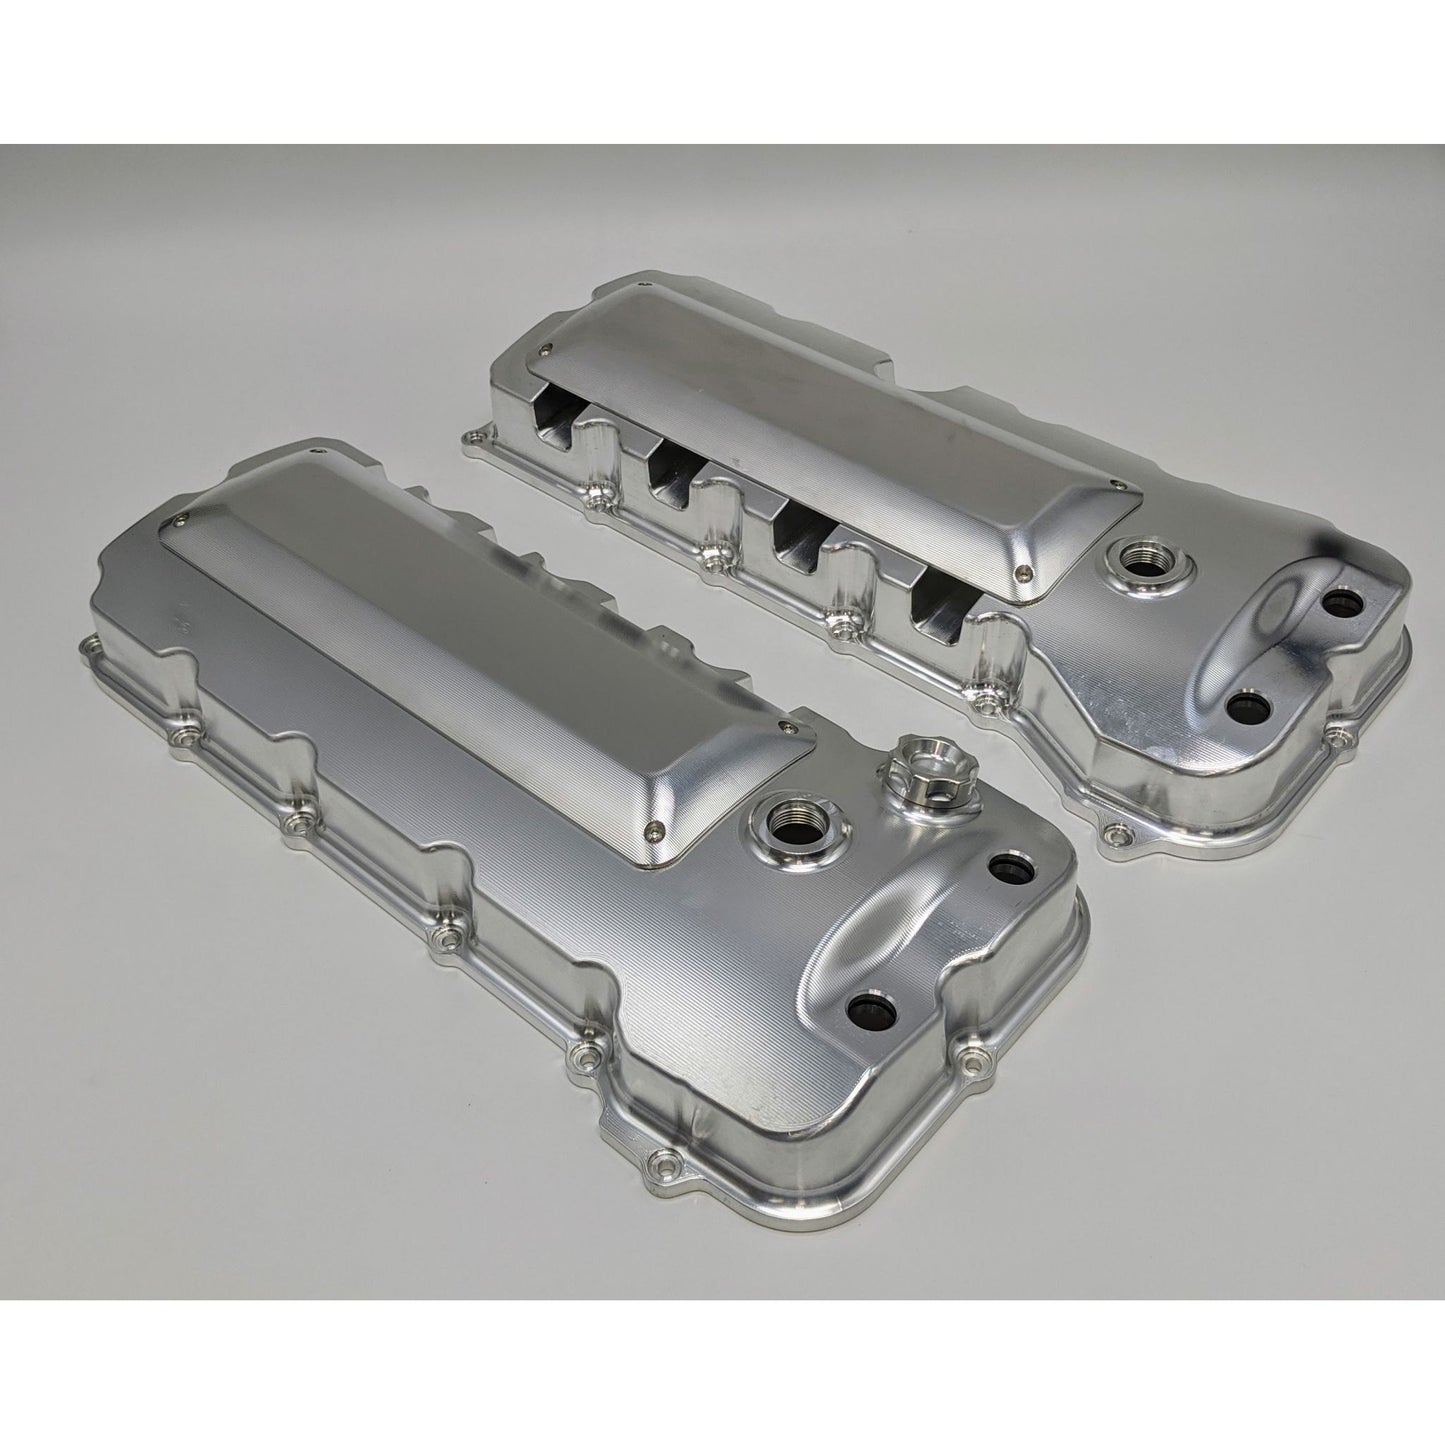 Granatelli Ford Coyote Valve Cover Set Billet; Set Includes (1)Left And (1)Right Side VC-1910